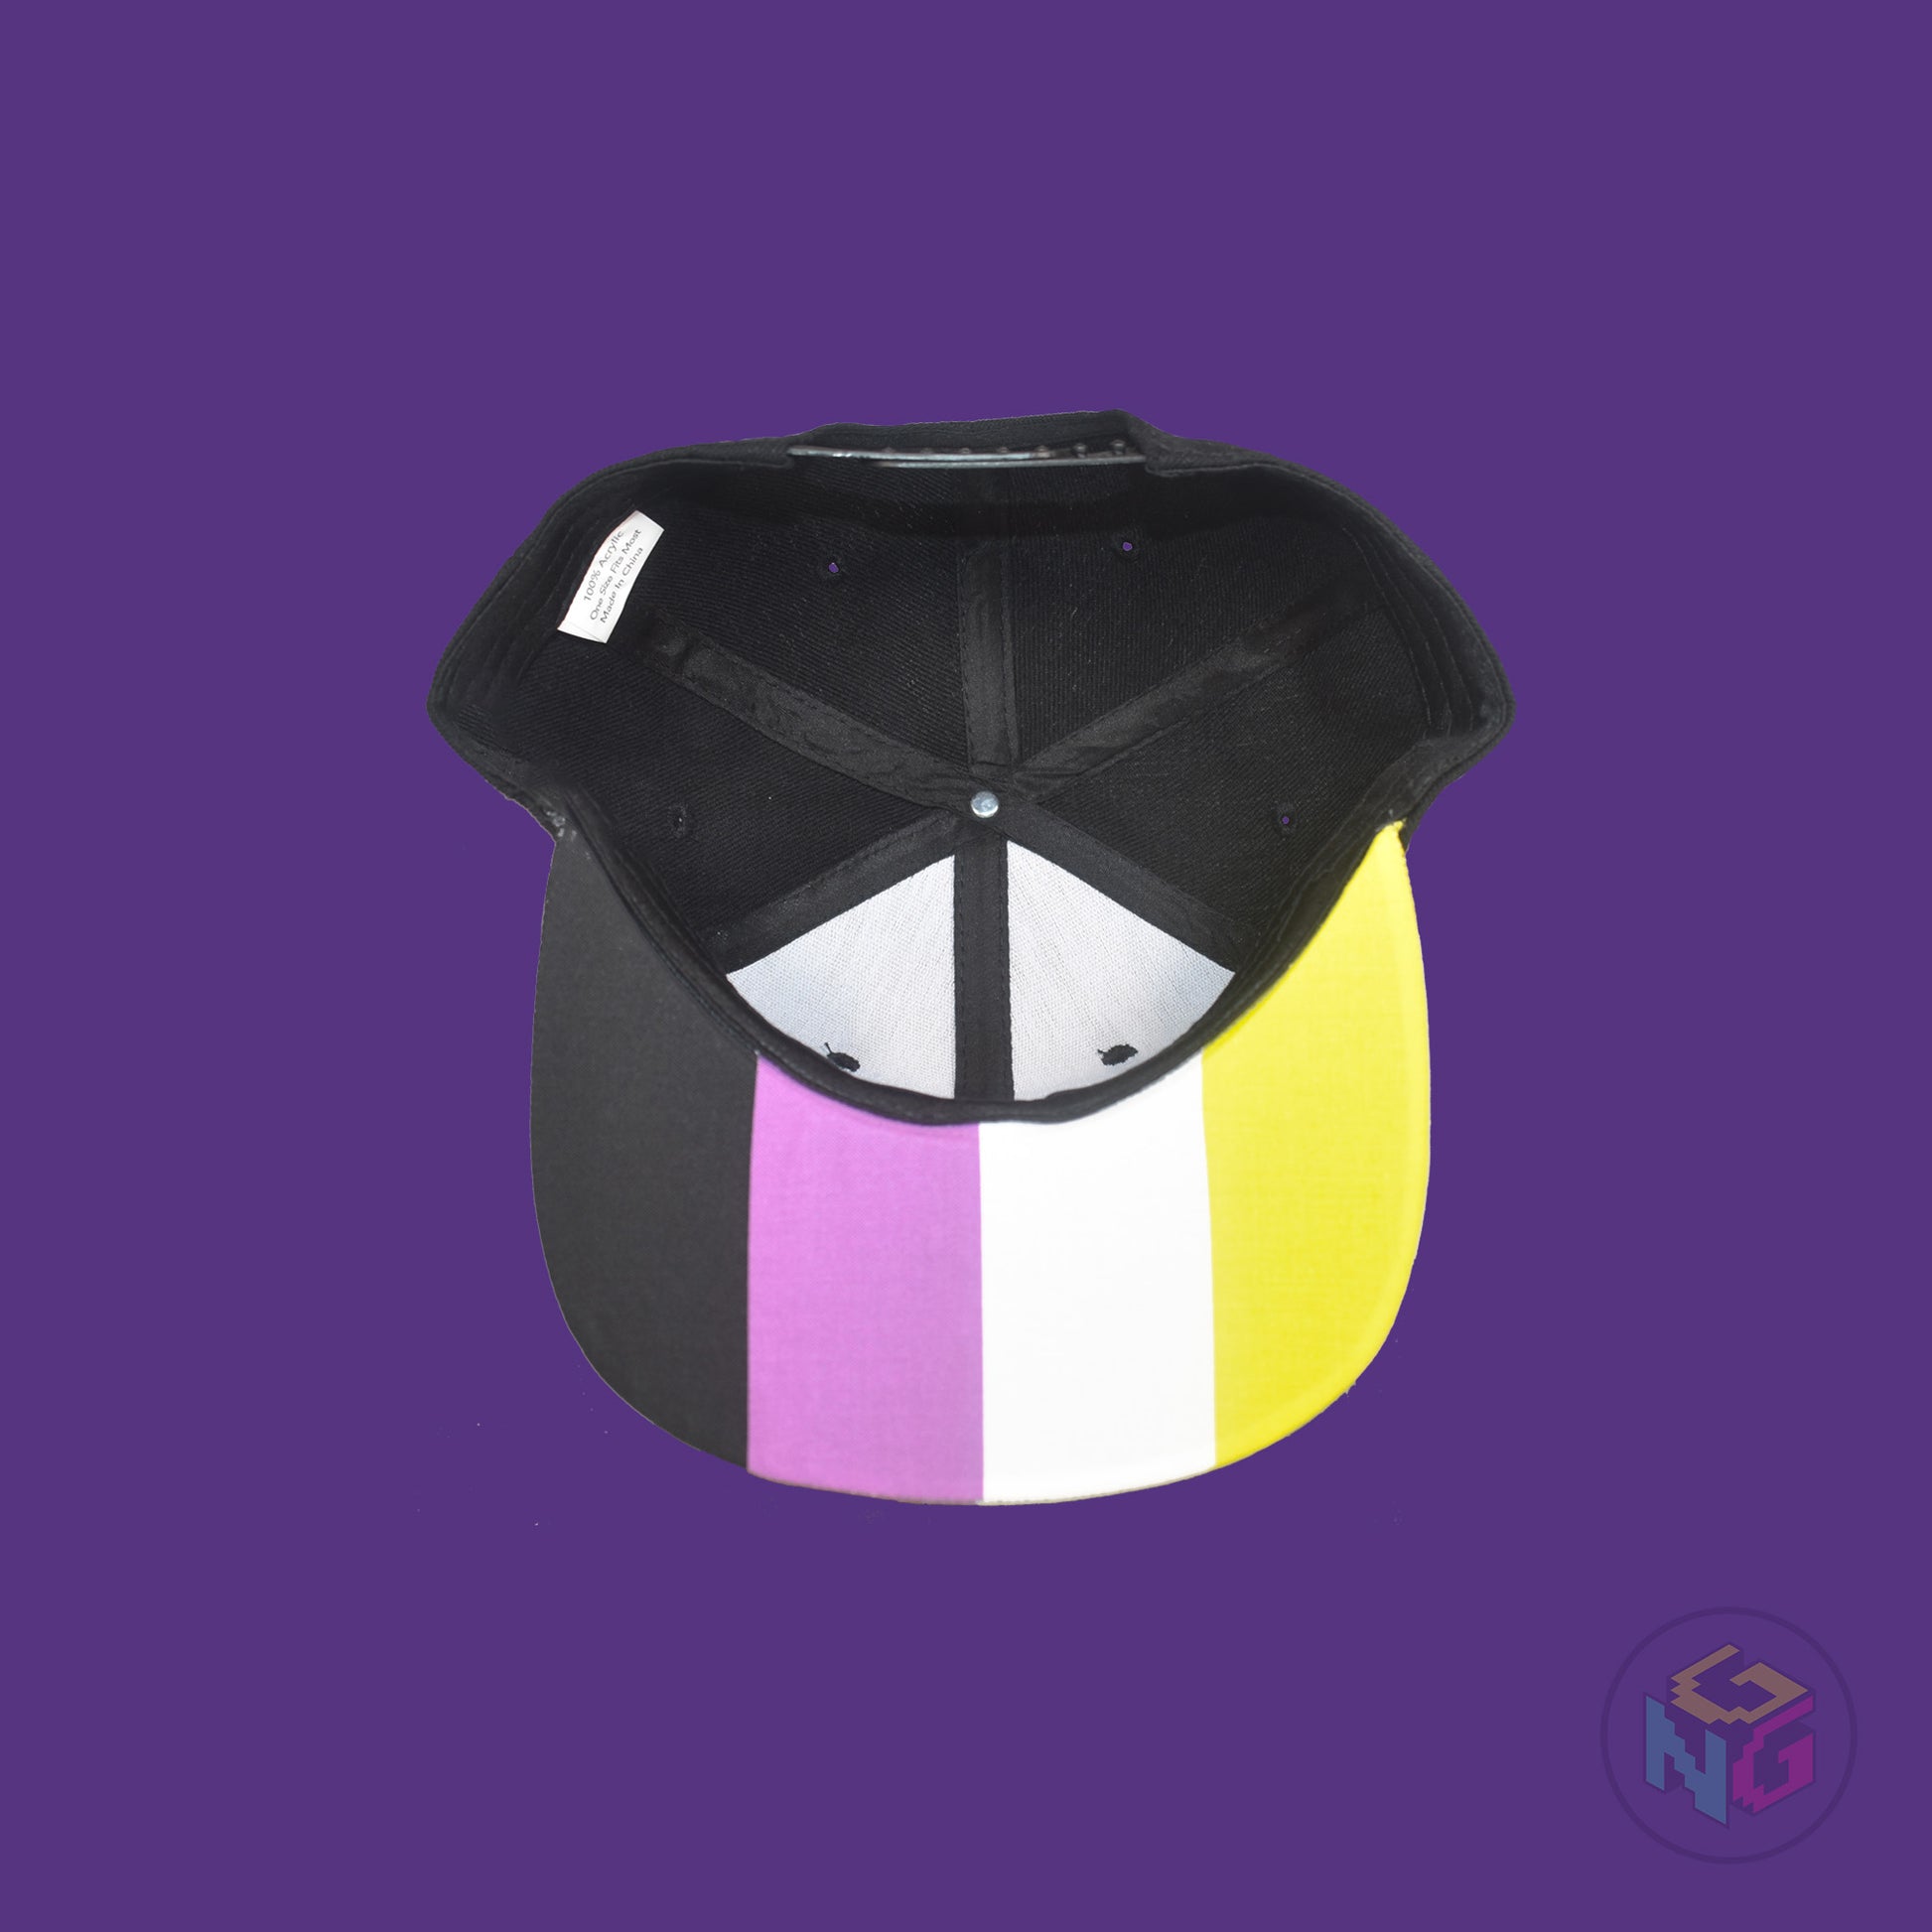 Black flat bill snapback hat. The brim has the nonbinary pride flag on both sides and the front of the hat has the word “ENBY” in yellow and purple letters. Underside view